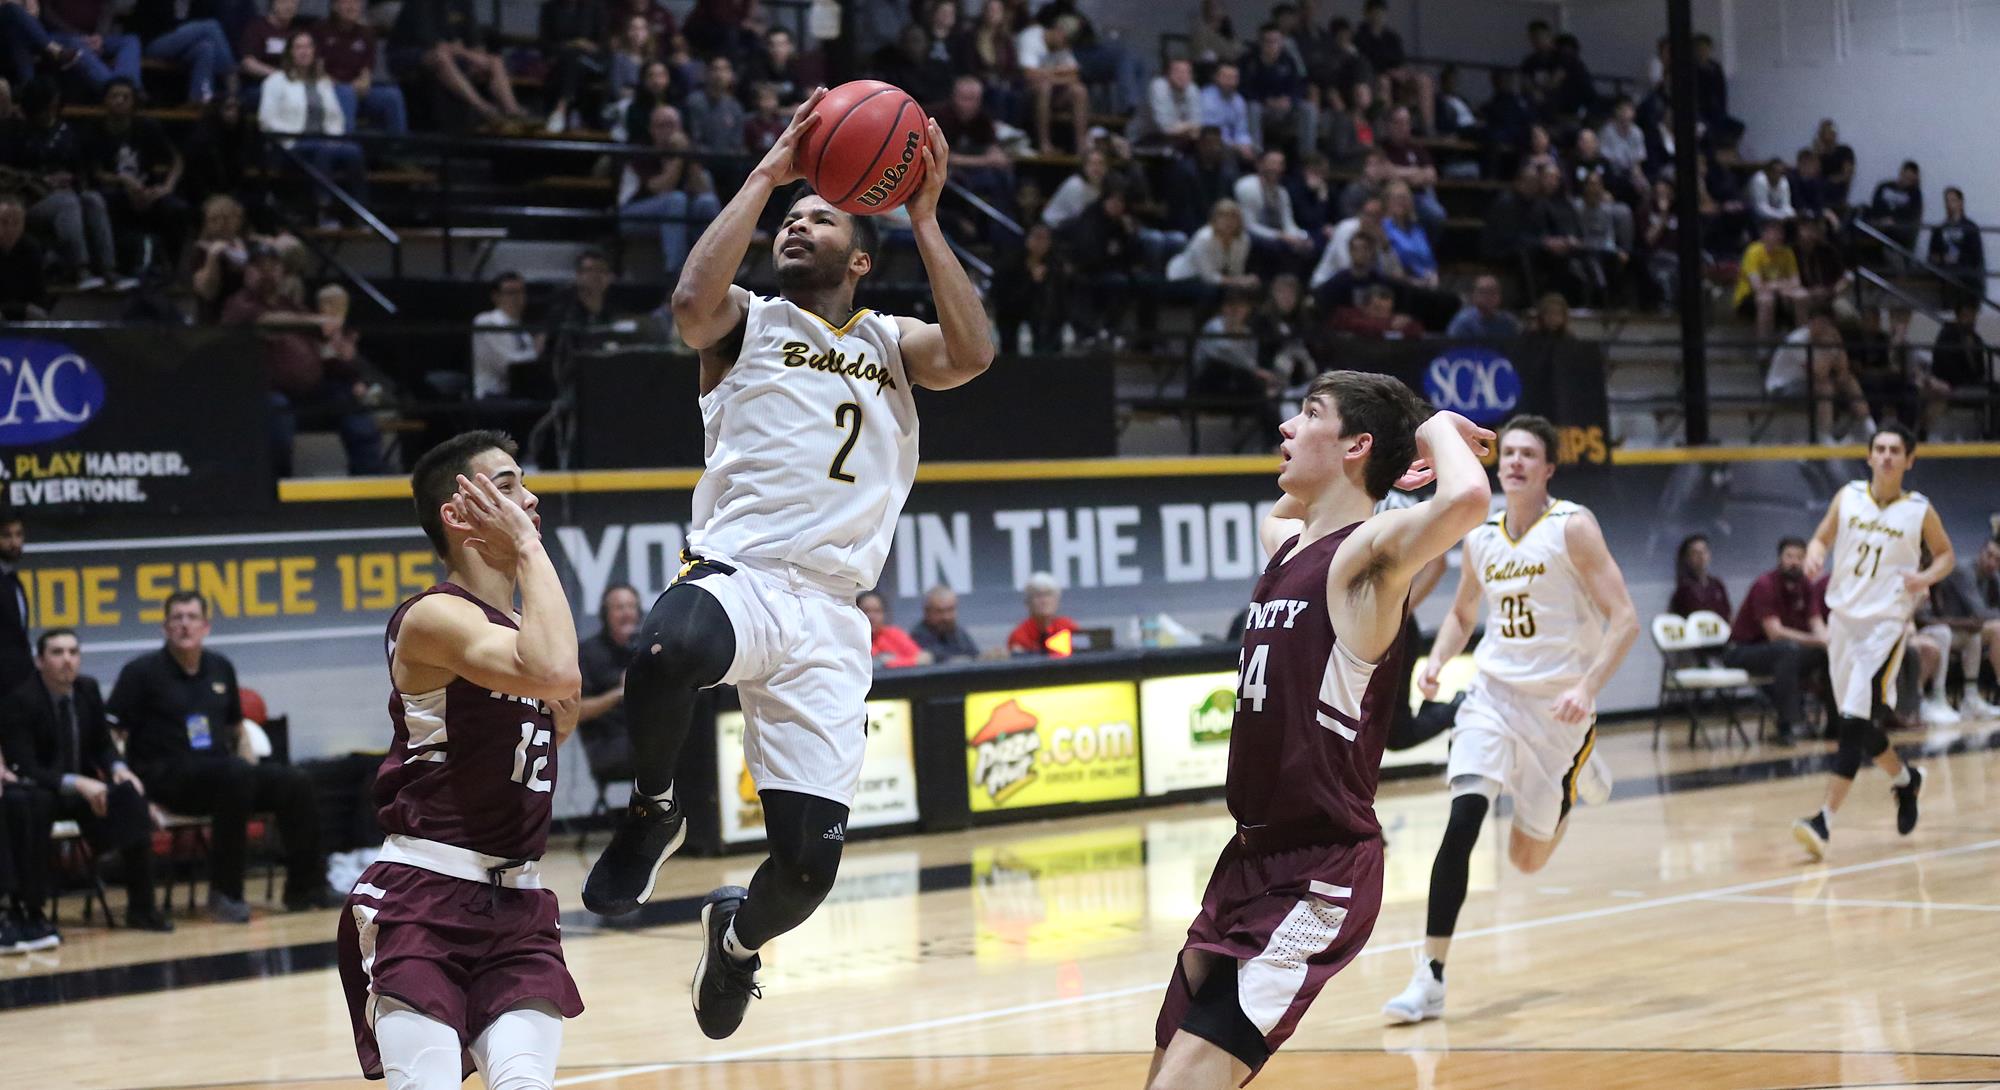 TLU returns to SCAC Championship final with 64-60 semifinal win over Trinity